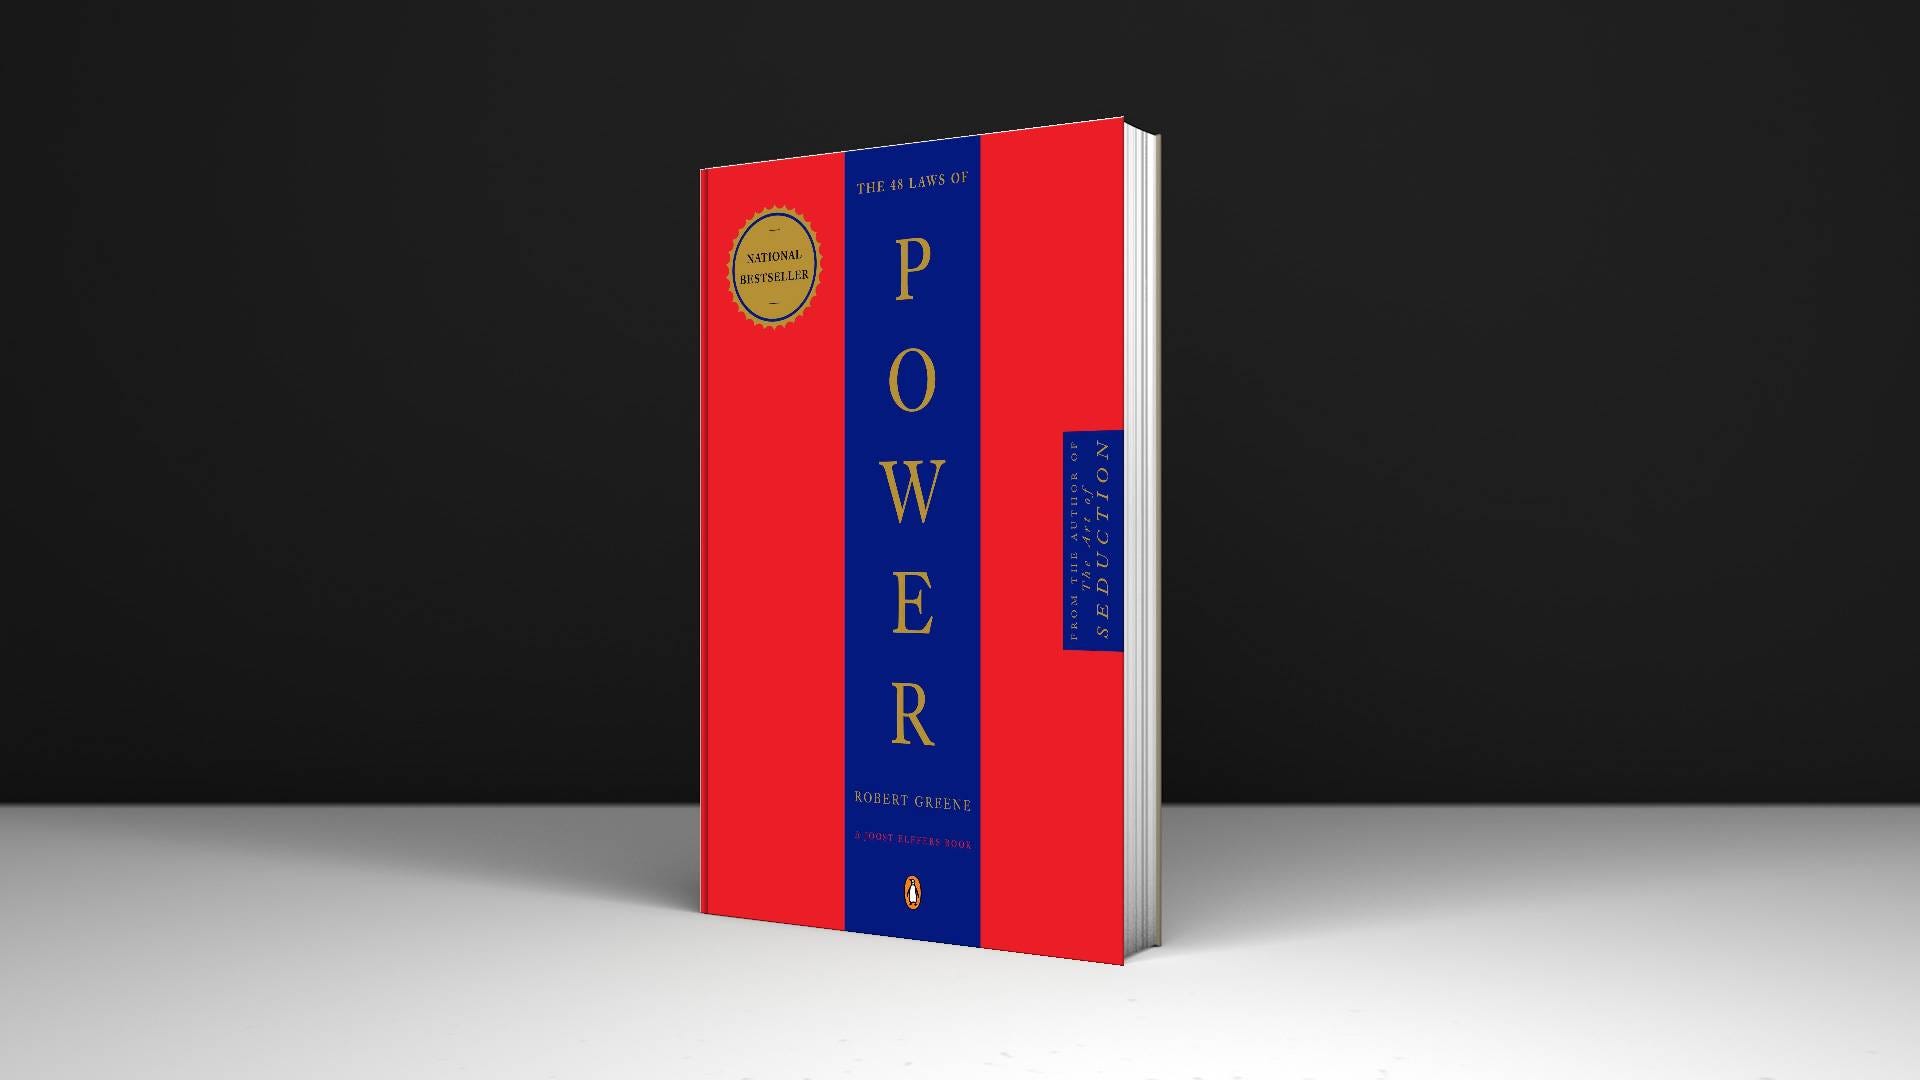 My Favourite Laws Of Power.. The 48 Laws of Power, written by